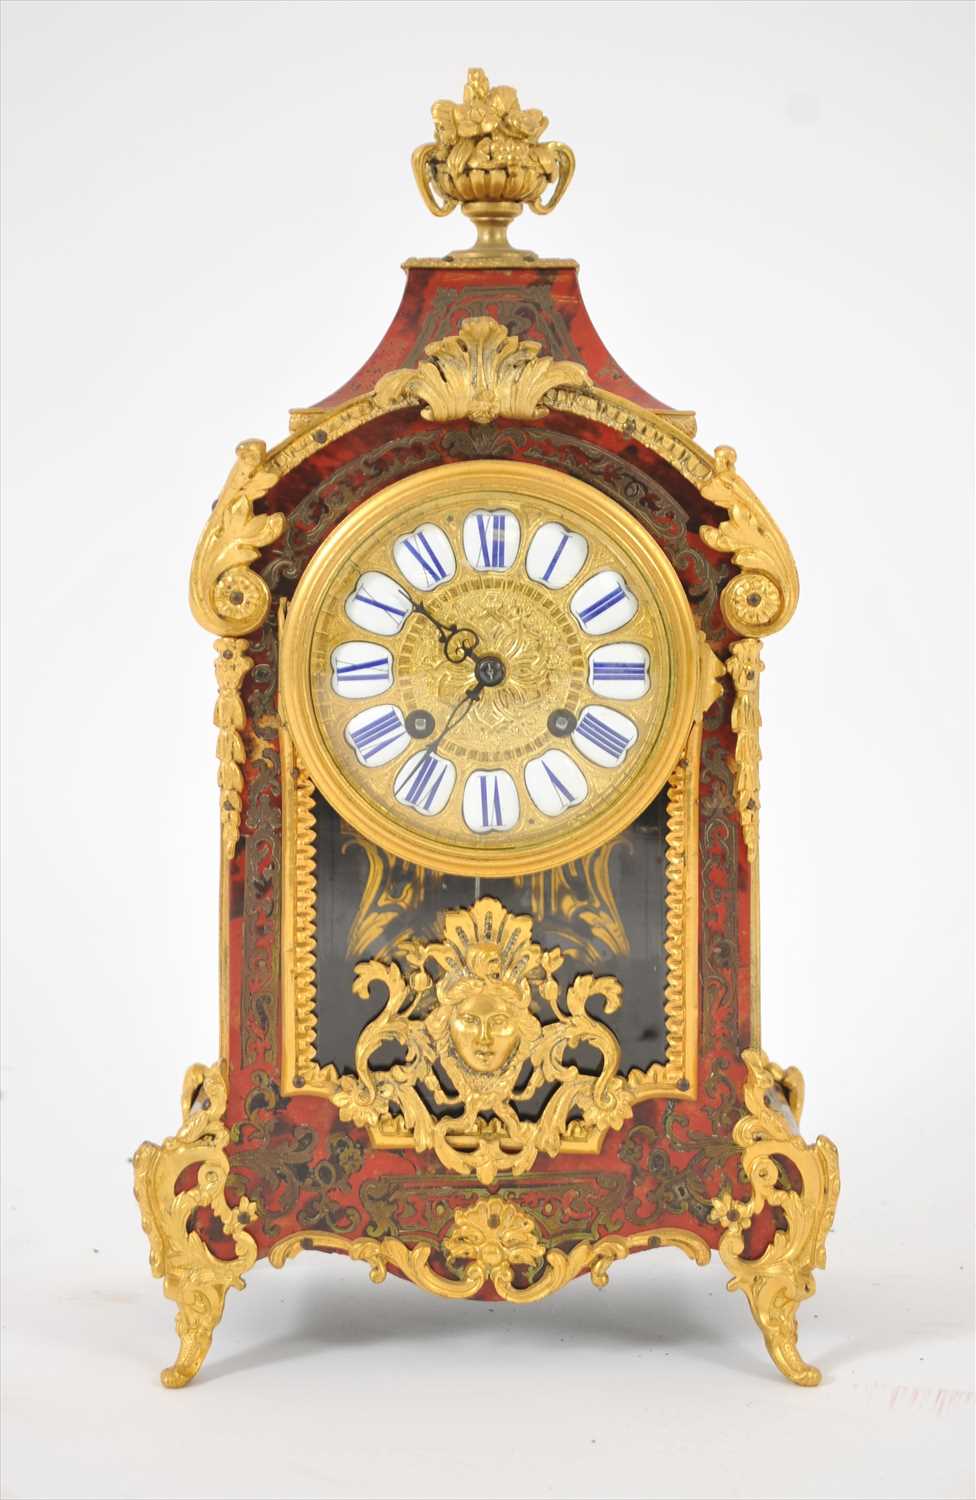 Lot 682 - A Leroy and Fitz (11935) boulle cased mantle clock